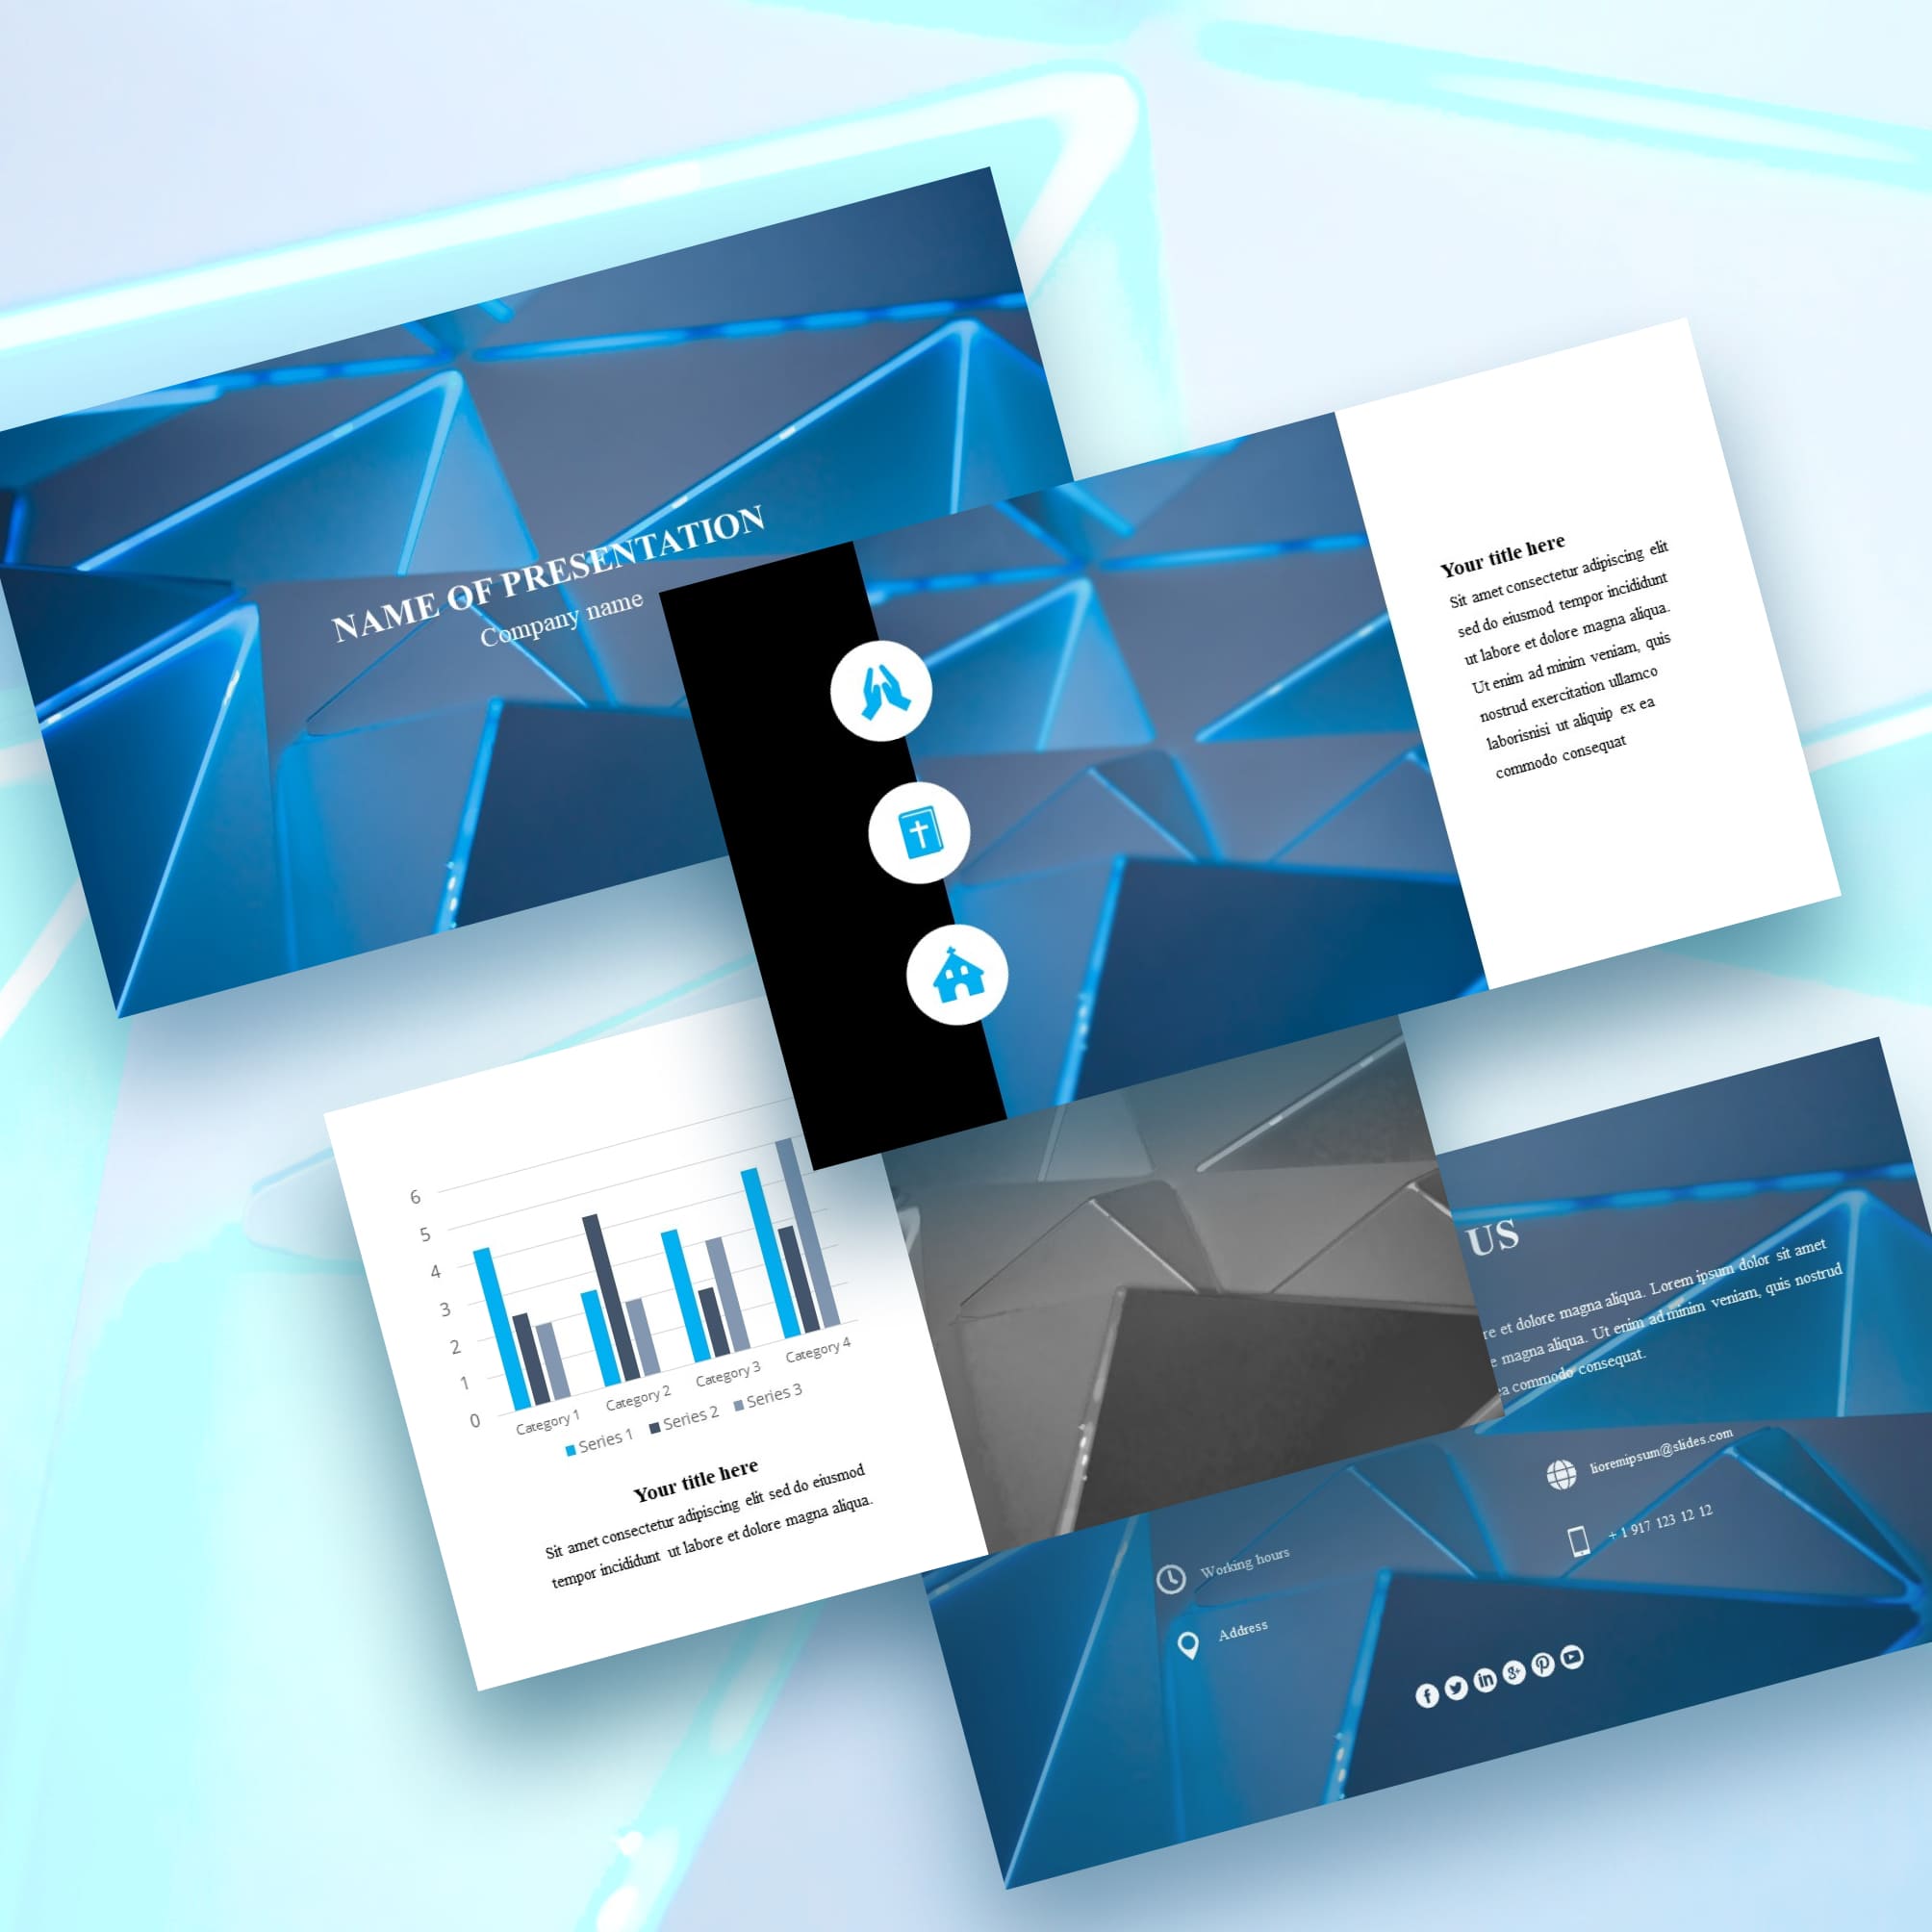 Abstraction - Free Worship Powerpoint Background Geometric Blue Cover.